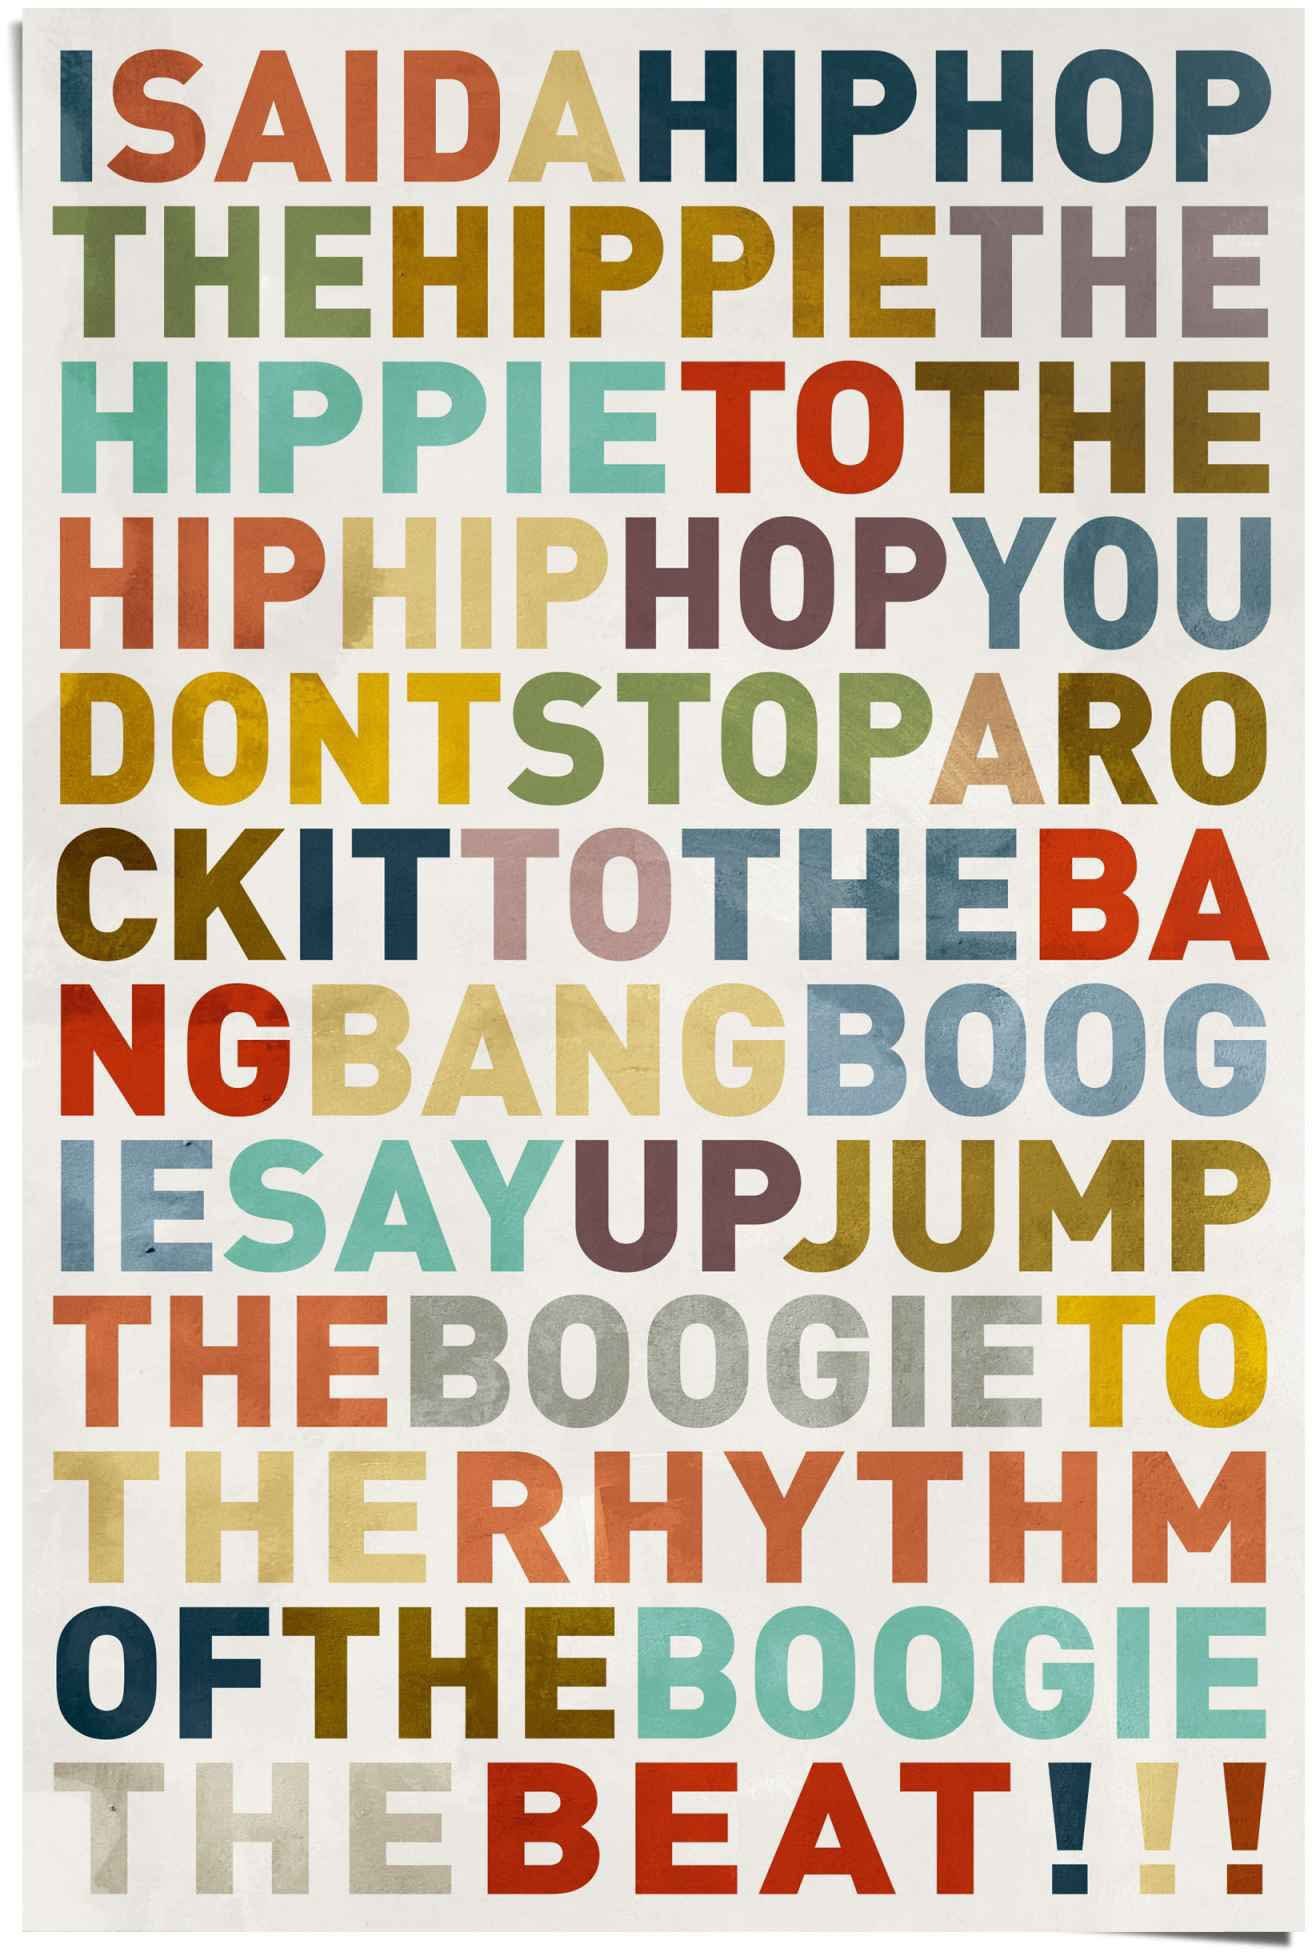 Songtext Poster St) HipHop Poster Musiker I Farbig - Musik, - - a (1 Reinders! said Hip-Hop